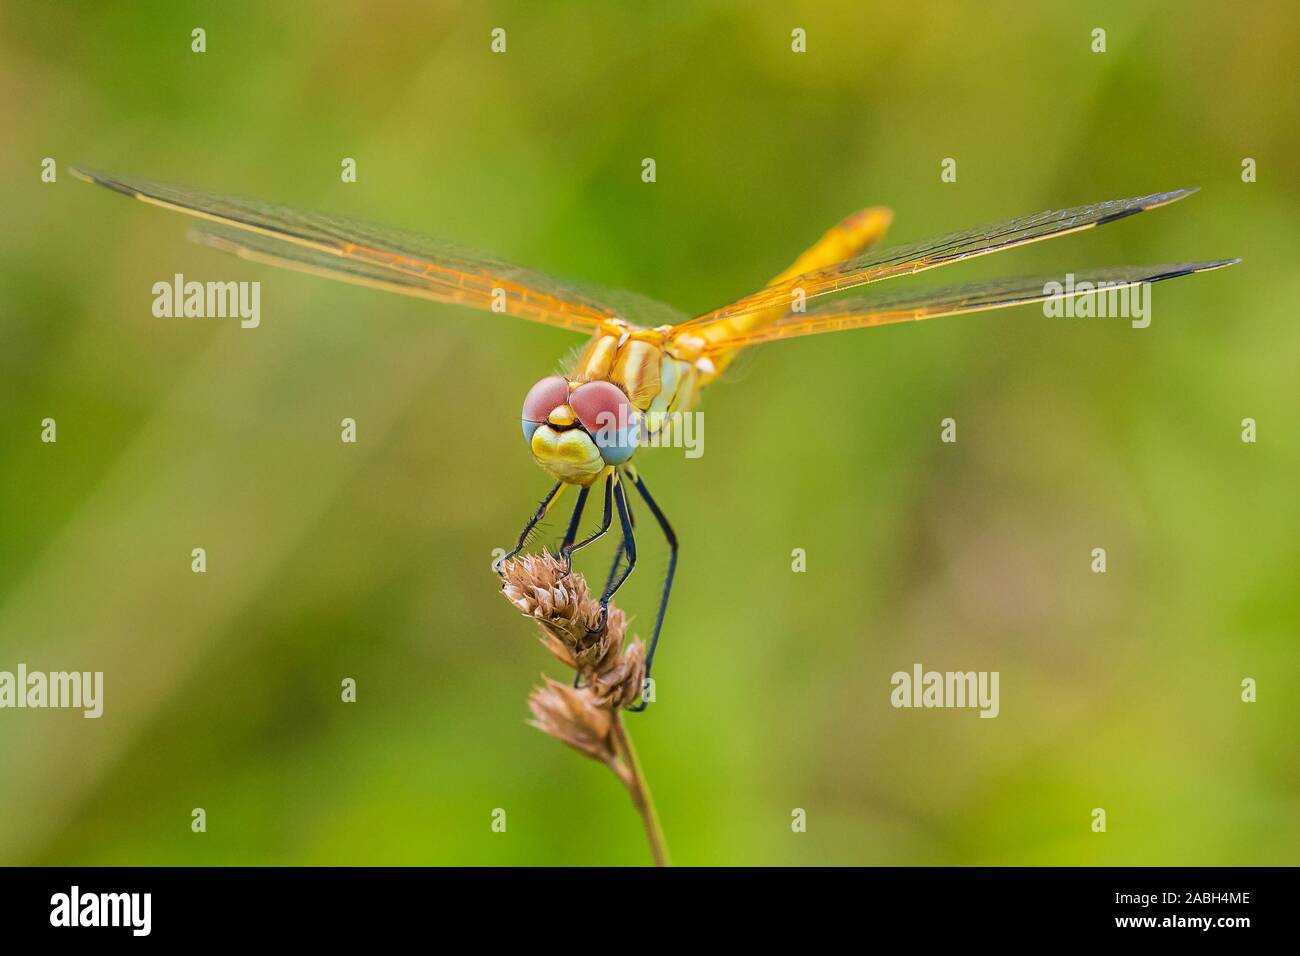 Close-up of a Sympetrum fonscolombii, Red-veined darter or nomad resting on vegetation Stock Photo